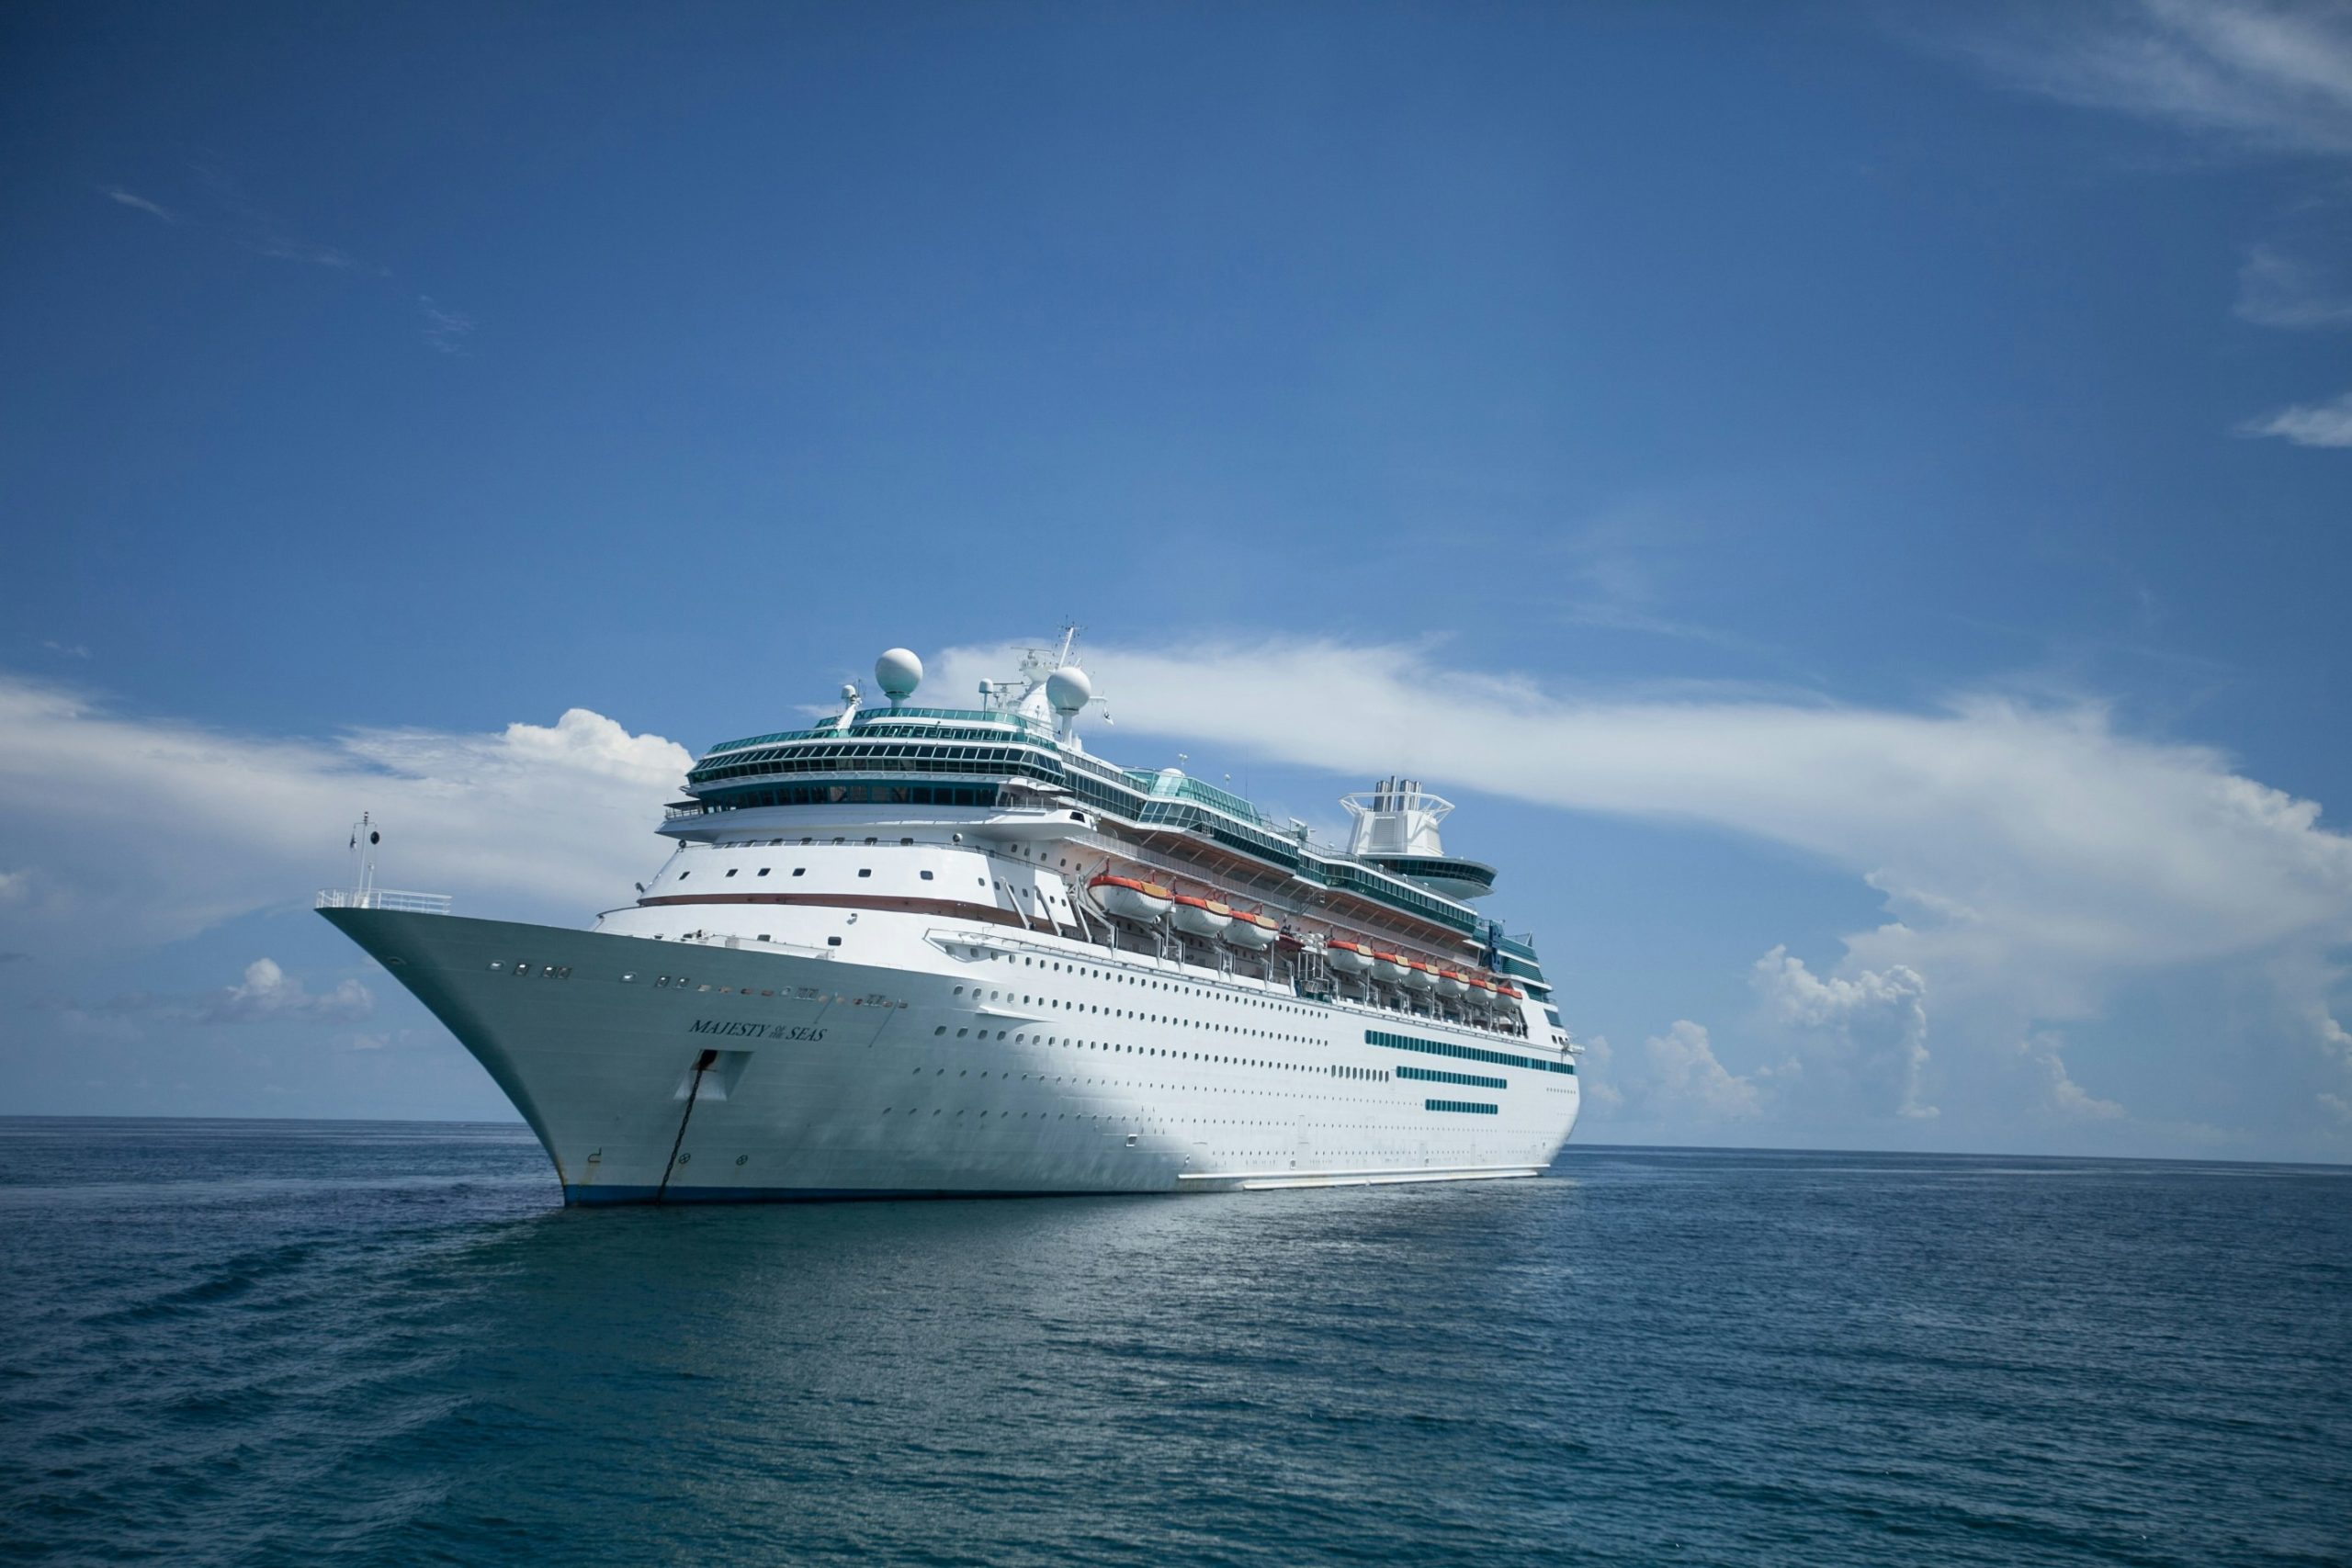 explore the world’s oceans and enjoy a luxury cruising experience with our exclusive cruise packages.